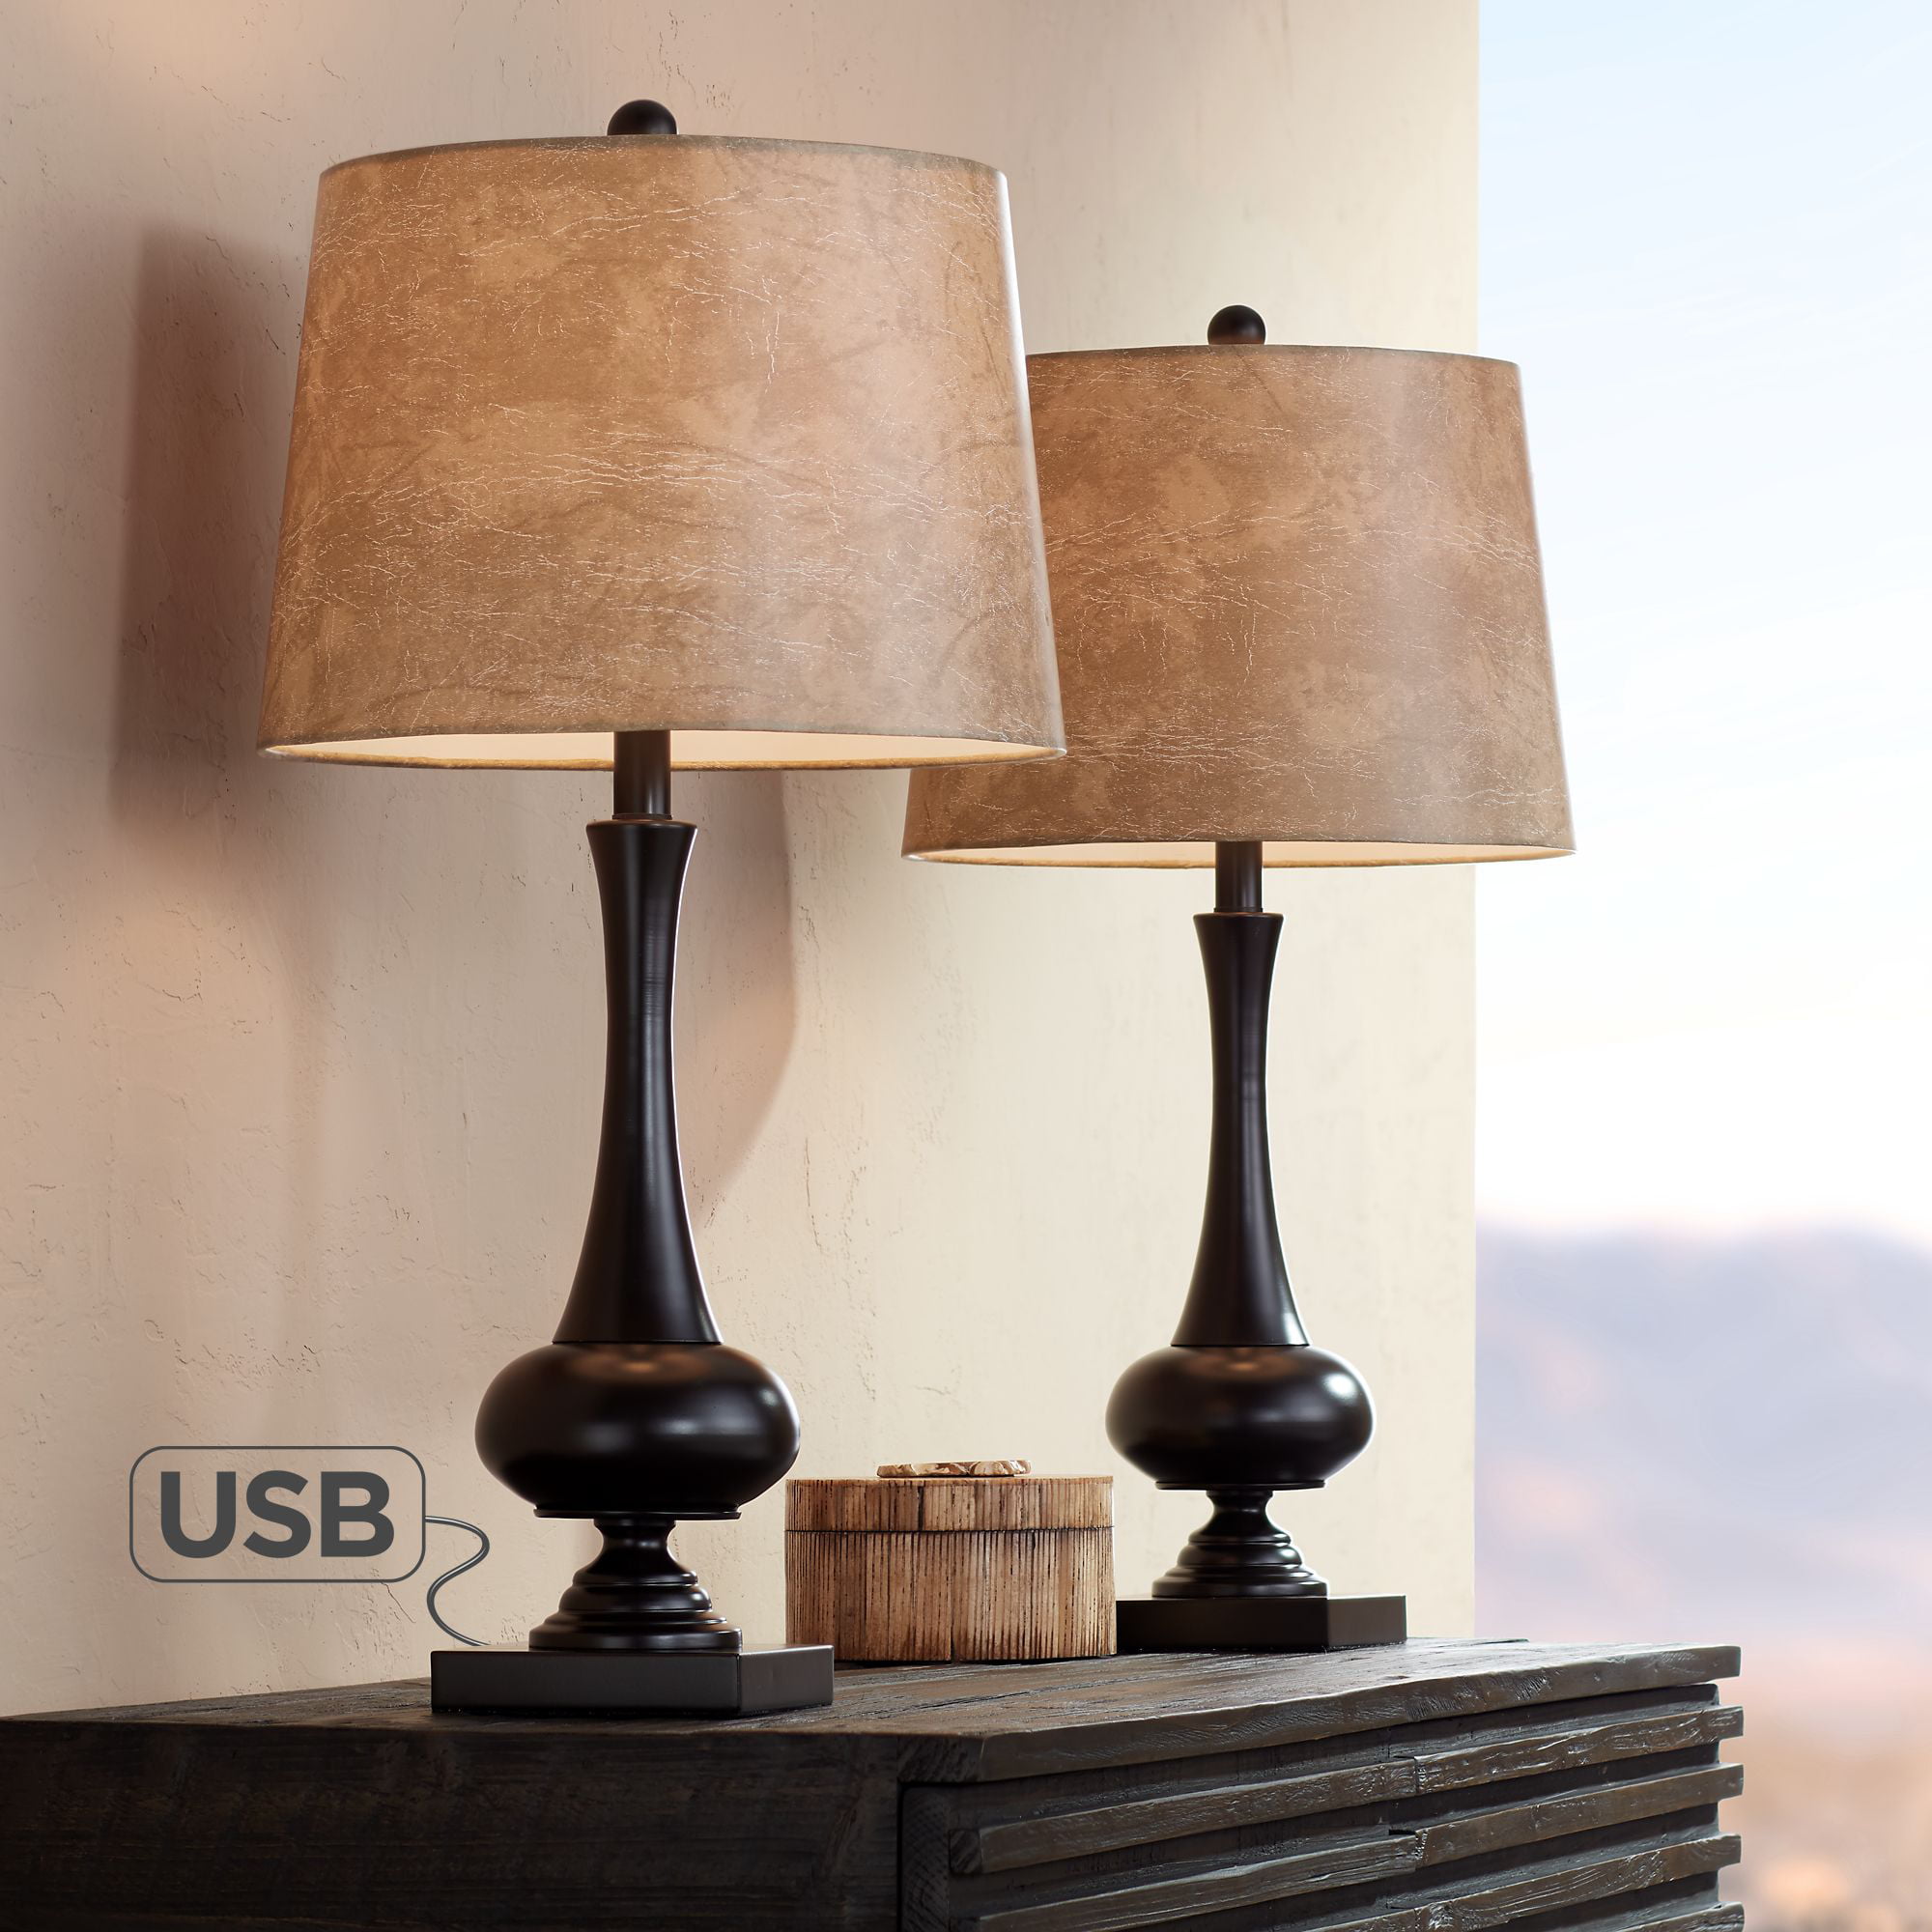 Franklin Iron Works Modern Rustic Table, Table Lamp Sets With Usb Port